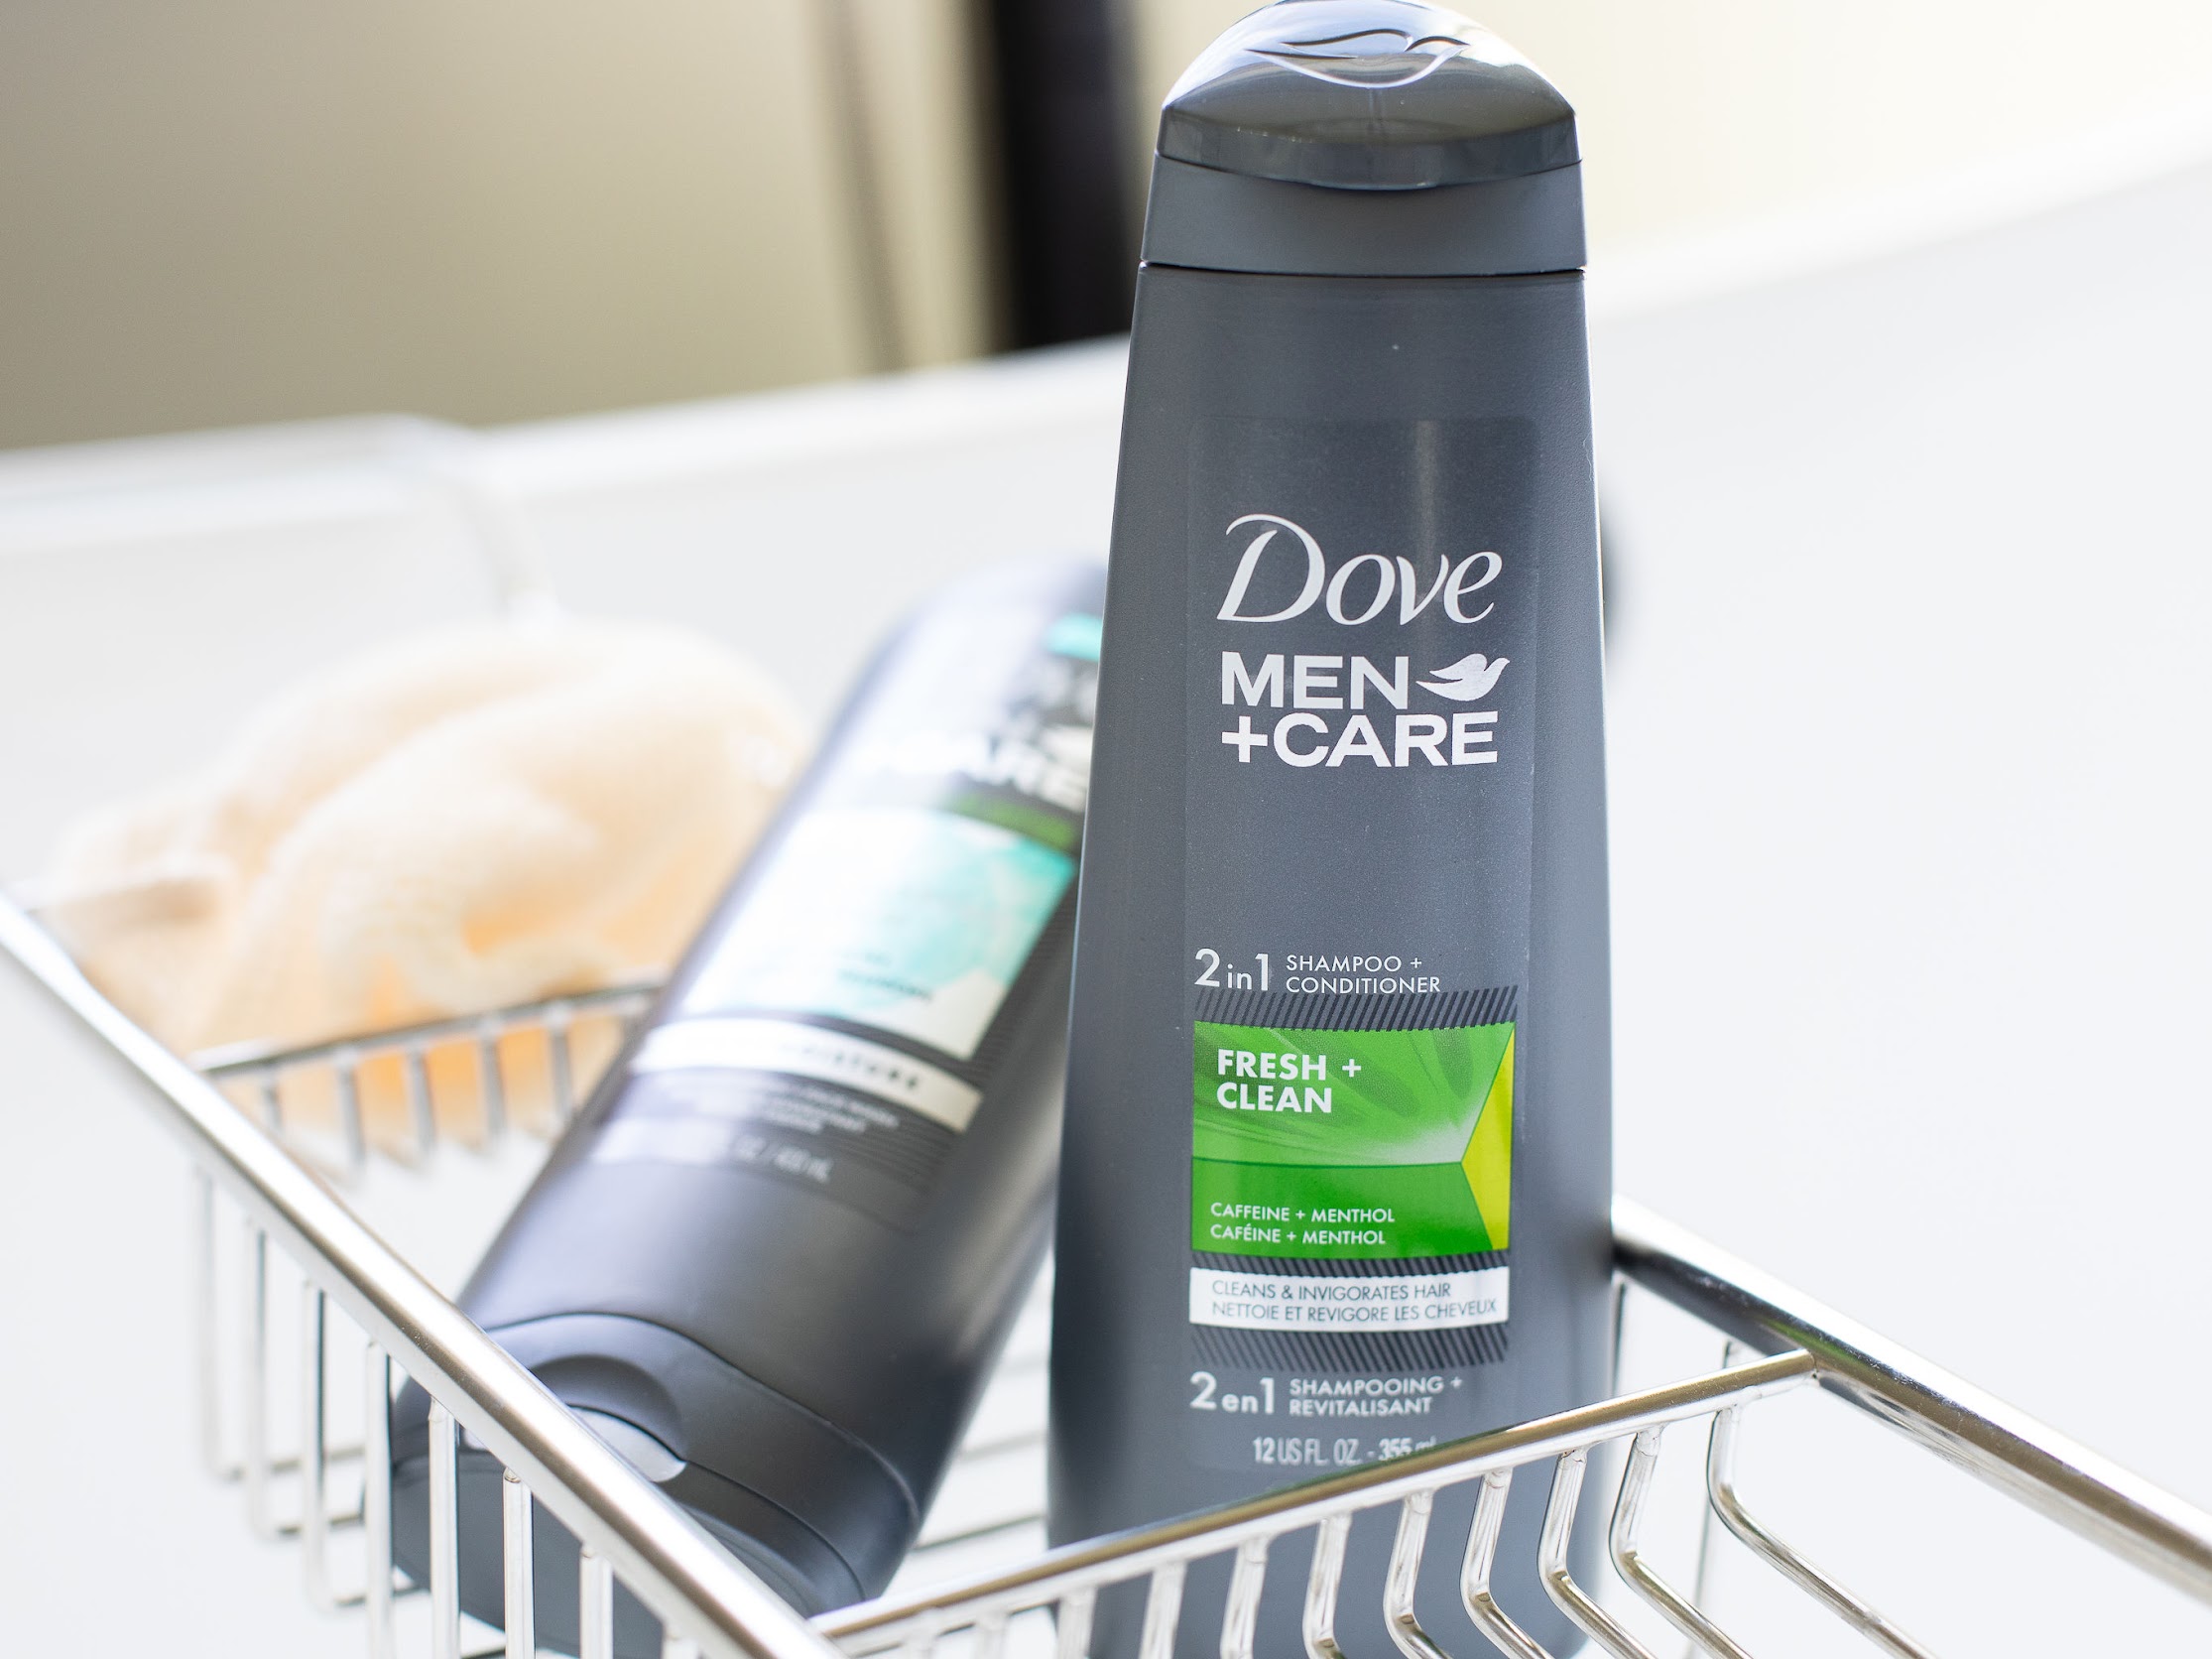 Dove Men+Care Hair Care Products As Low As $2.09 At Publix (Regular Price $5.59)